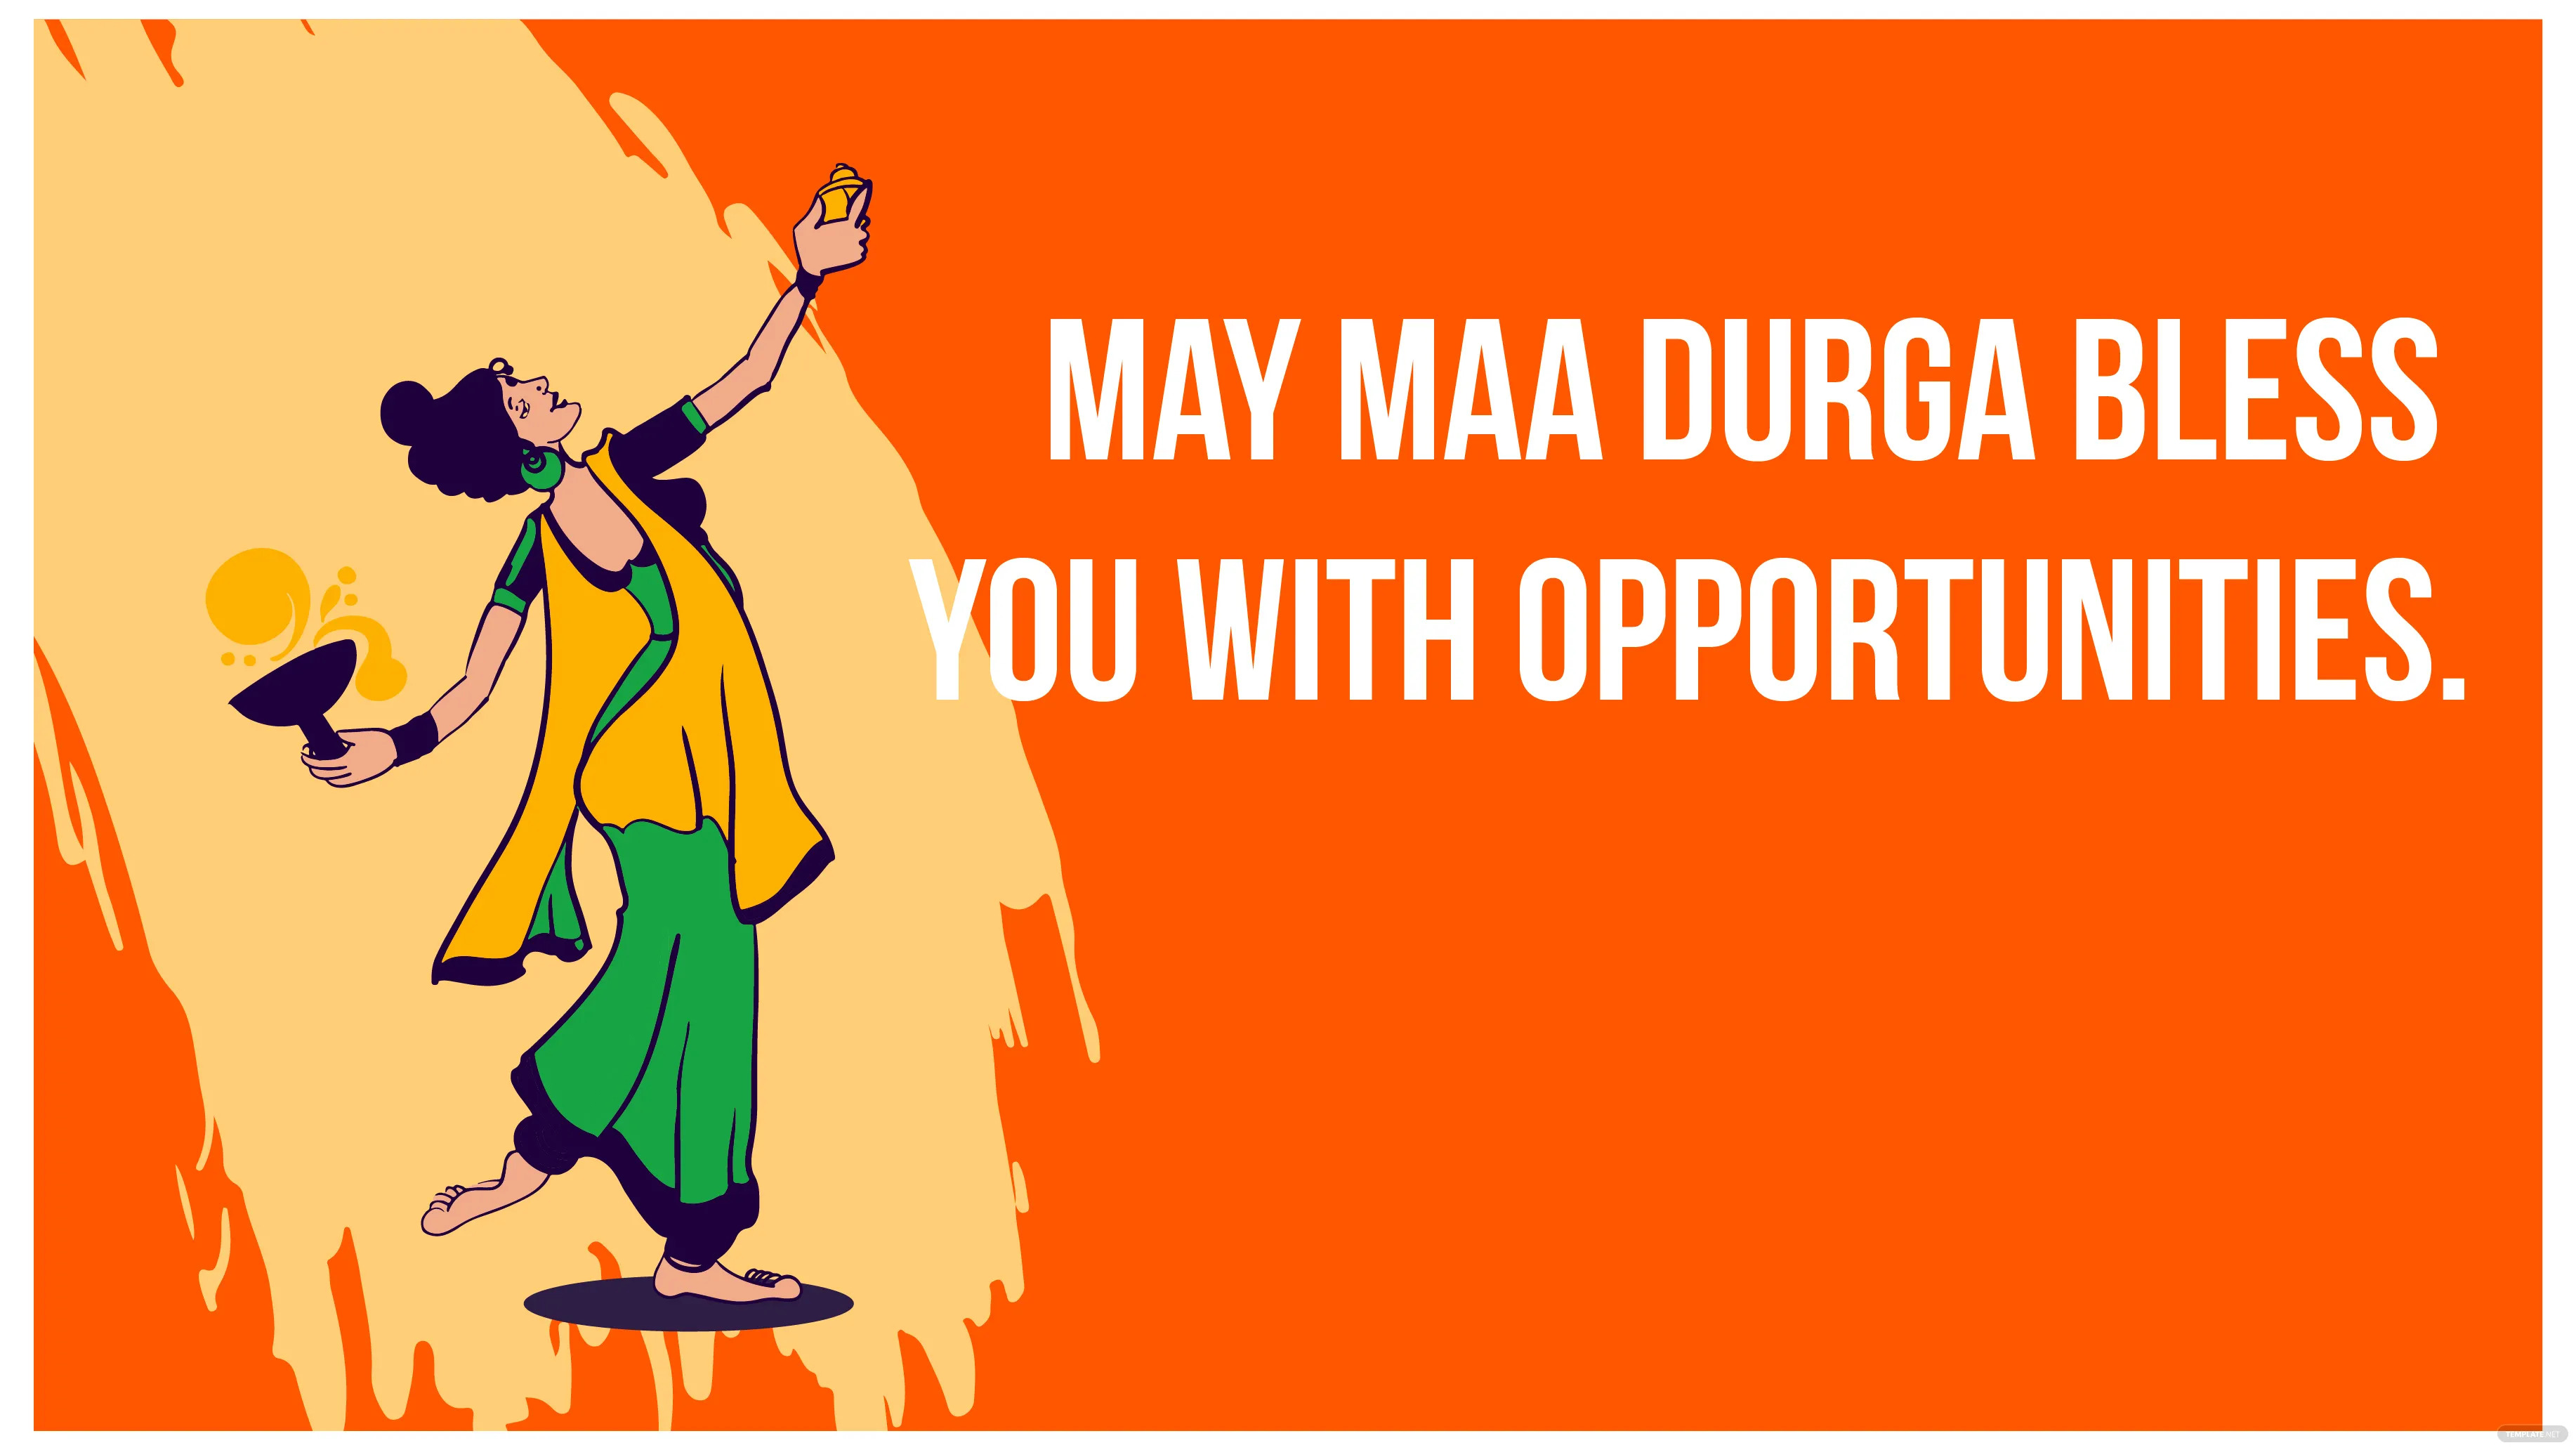 durga puja wishes background ideas examples